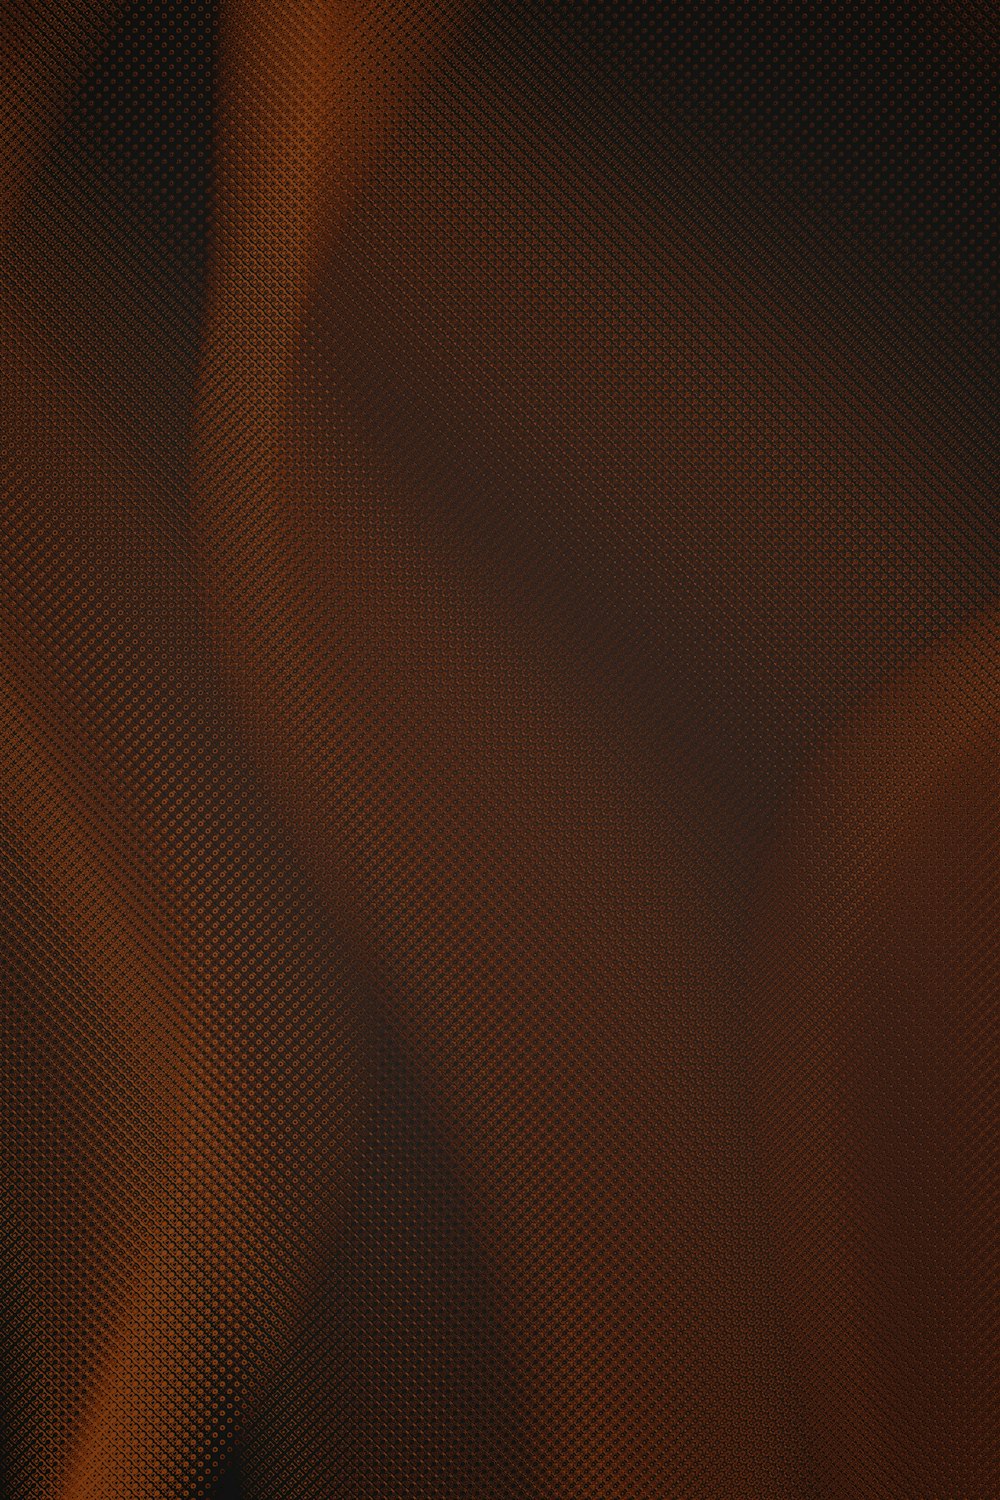 a blurry image of an orange and black background